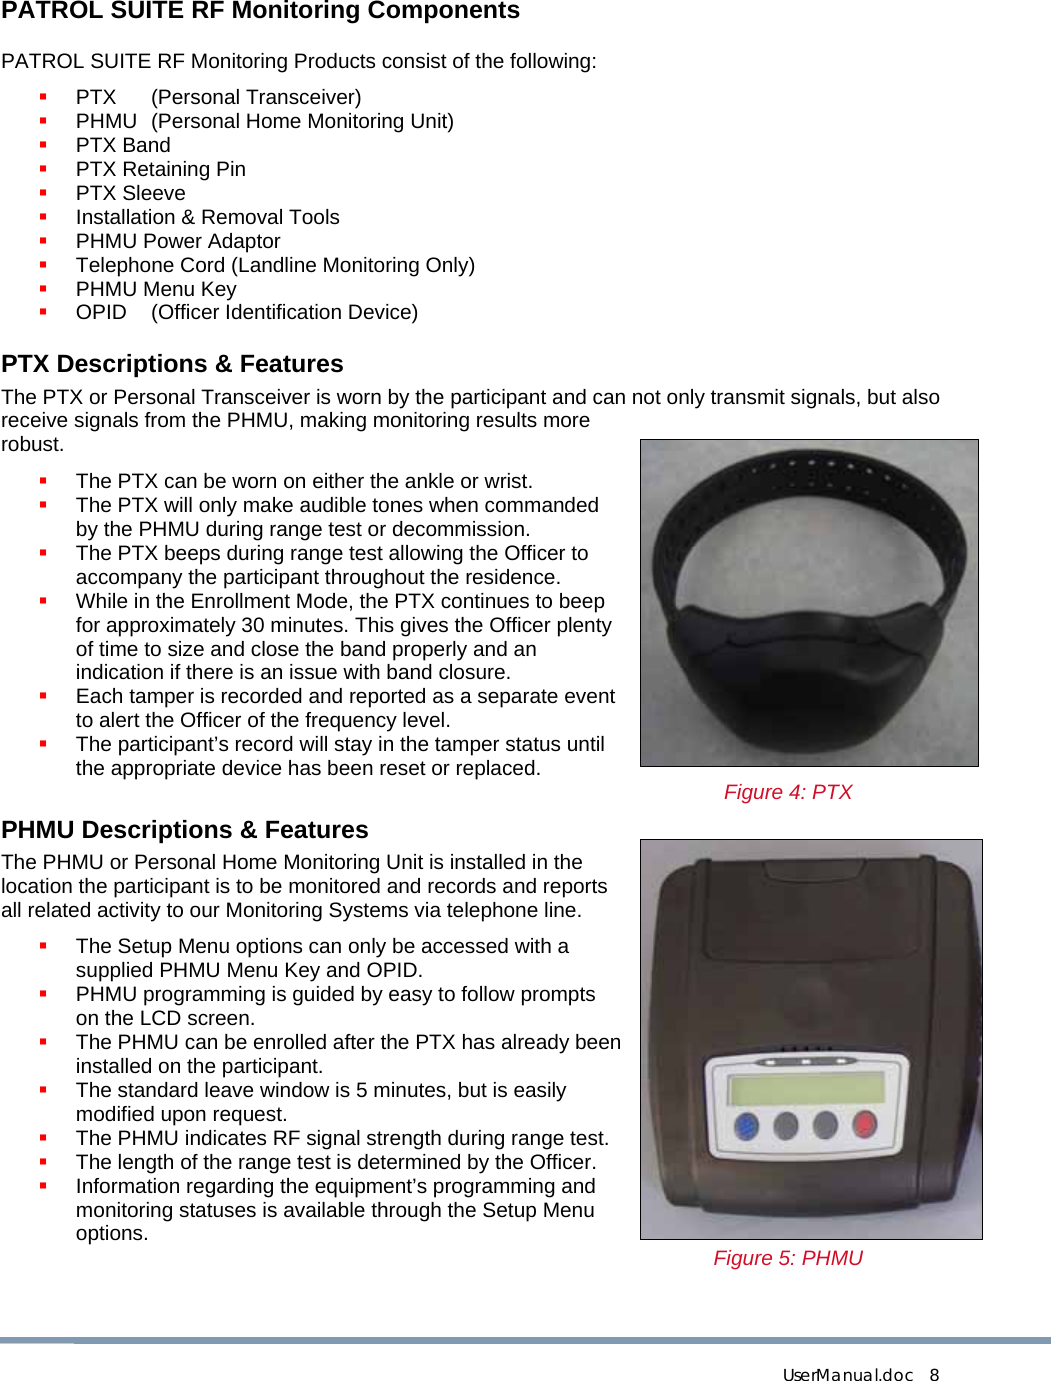  UserManual.doc   8 PATROL SUITE RF Monitoring Components PATROL SUITE RF Monitoring Products consist of the following:  PTX (Personal Transceiver)  PHMU  (Personal Home Monitoring Unit)  PTX Band  PTX Retaining Pin  PTX Sleeve  Installation &amp; Removal Tools  PHMU Power Adaptor  Telephone Cord (Landline Monitoring Only)  PHMU Menu Key  OPID  (Officer Identification Device) PTX Descriptions &amp; Features The PTX or Personal Transceiver is worn by the participant and can not only transmit signals, but also receive signals from the PHMU, making monitoring results more robust.  The PTX can be worn on either the ankle or wrist.  The PTX will only make audible tones when commanded by the PHMU during range test or decommission.  The PTX beeps during range test allowing the Officer to accompany the participant throughout the residence.  While in the Enrollment Mode, the PTX continues to beep for approximately 30 minutes. This gives the Officer plenty of time to size and close the band properly and an indication if there is an issue with band closure.  Each tamper is recorded and reported as a separate event to alert the Officer of the frequency level.  The participant’s record will stay in the tamper status until the appropriate device has been reset or replaced.  Figure 4: PTX PHMU Descriptions &amp; Features The PHMU or Personal Home Monitoring Unit is installed in the location the participant is to be monitored and records and reports all related activity to our Monitoring Systems via telephone line.  The Setup Menu options can only be accessed with a supplied PHMU Menu Key and OPID.  PHMU programming is guided by easy to follow prompts on the LCD screen.  The PHMU can be enrolled after the PTX has already been installed on the participant.  The standard leave window is 5 minutes, but is easily modified upon request.  The PHMU indicates RF signal strength during range test.  The length of the range test is determined by the Officer.  Information regarding the equipment’s programming and monitoring statuses is available through the Setup Menu options.  Figure 5: PHMU  